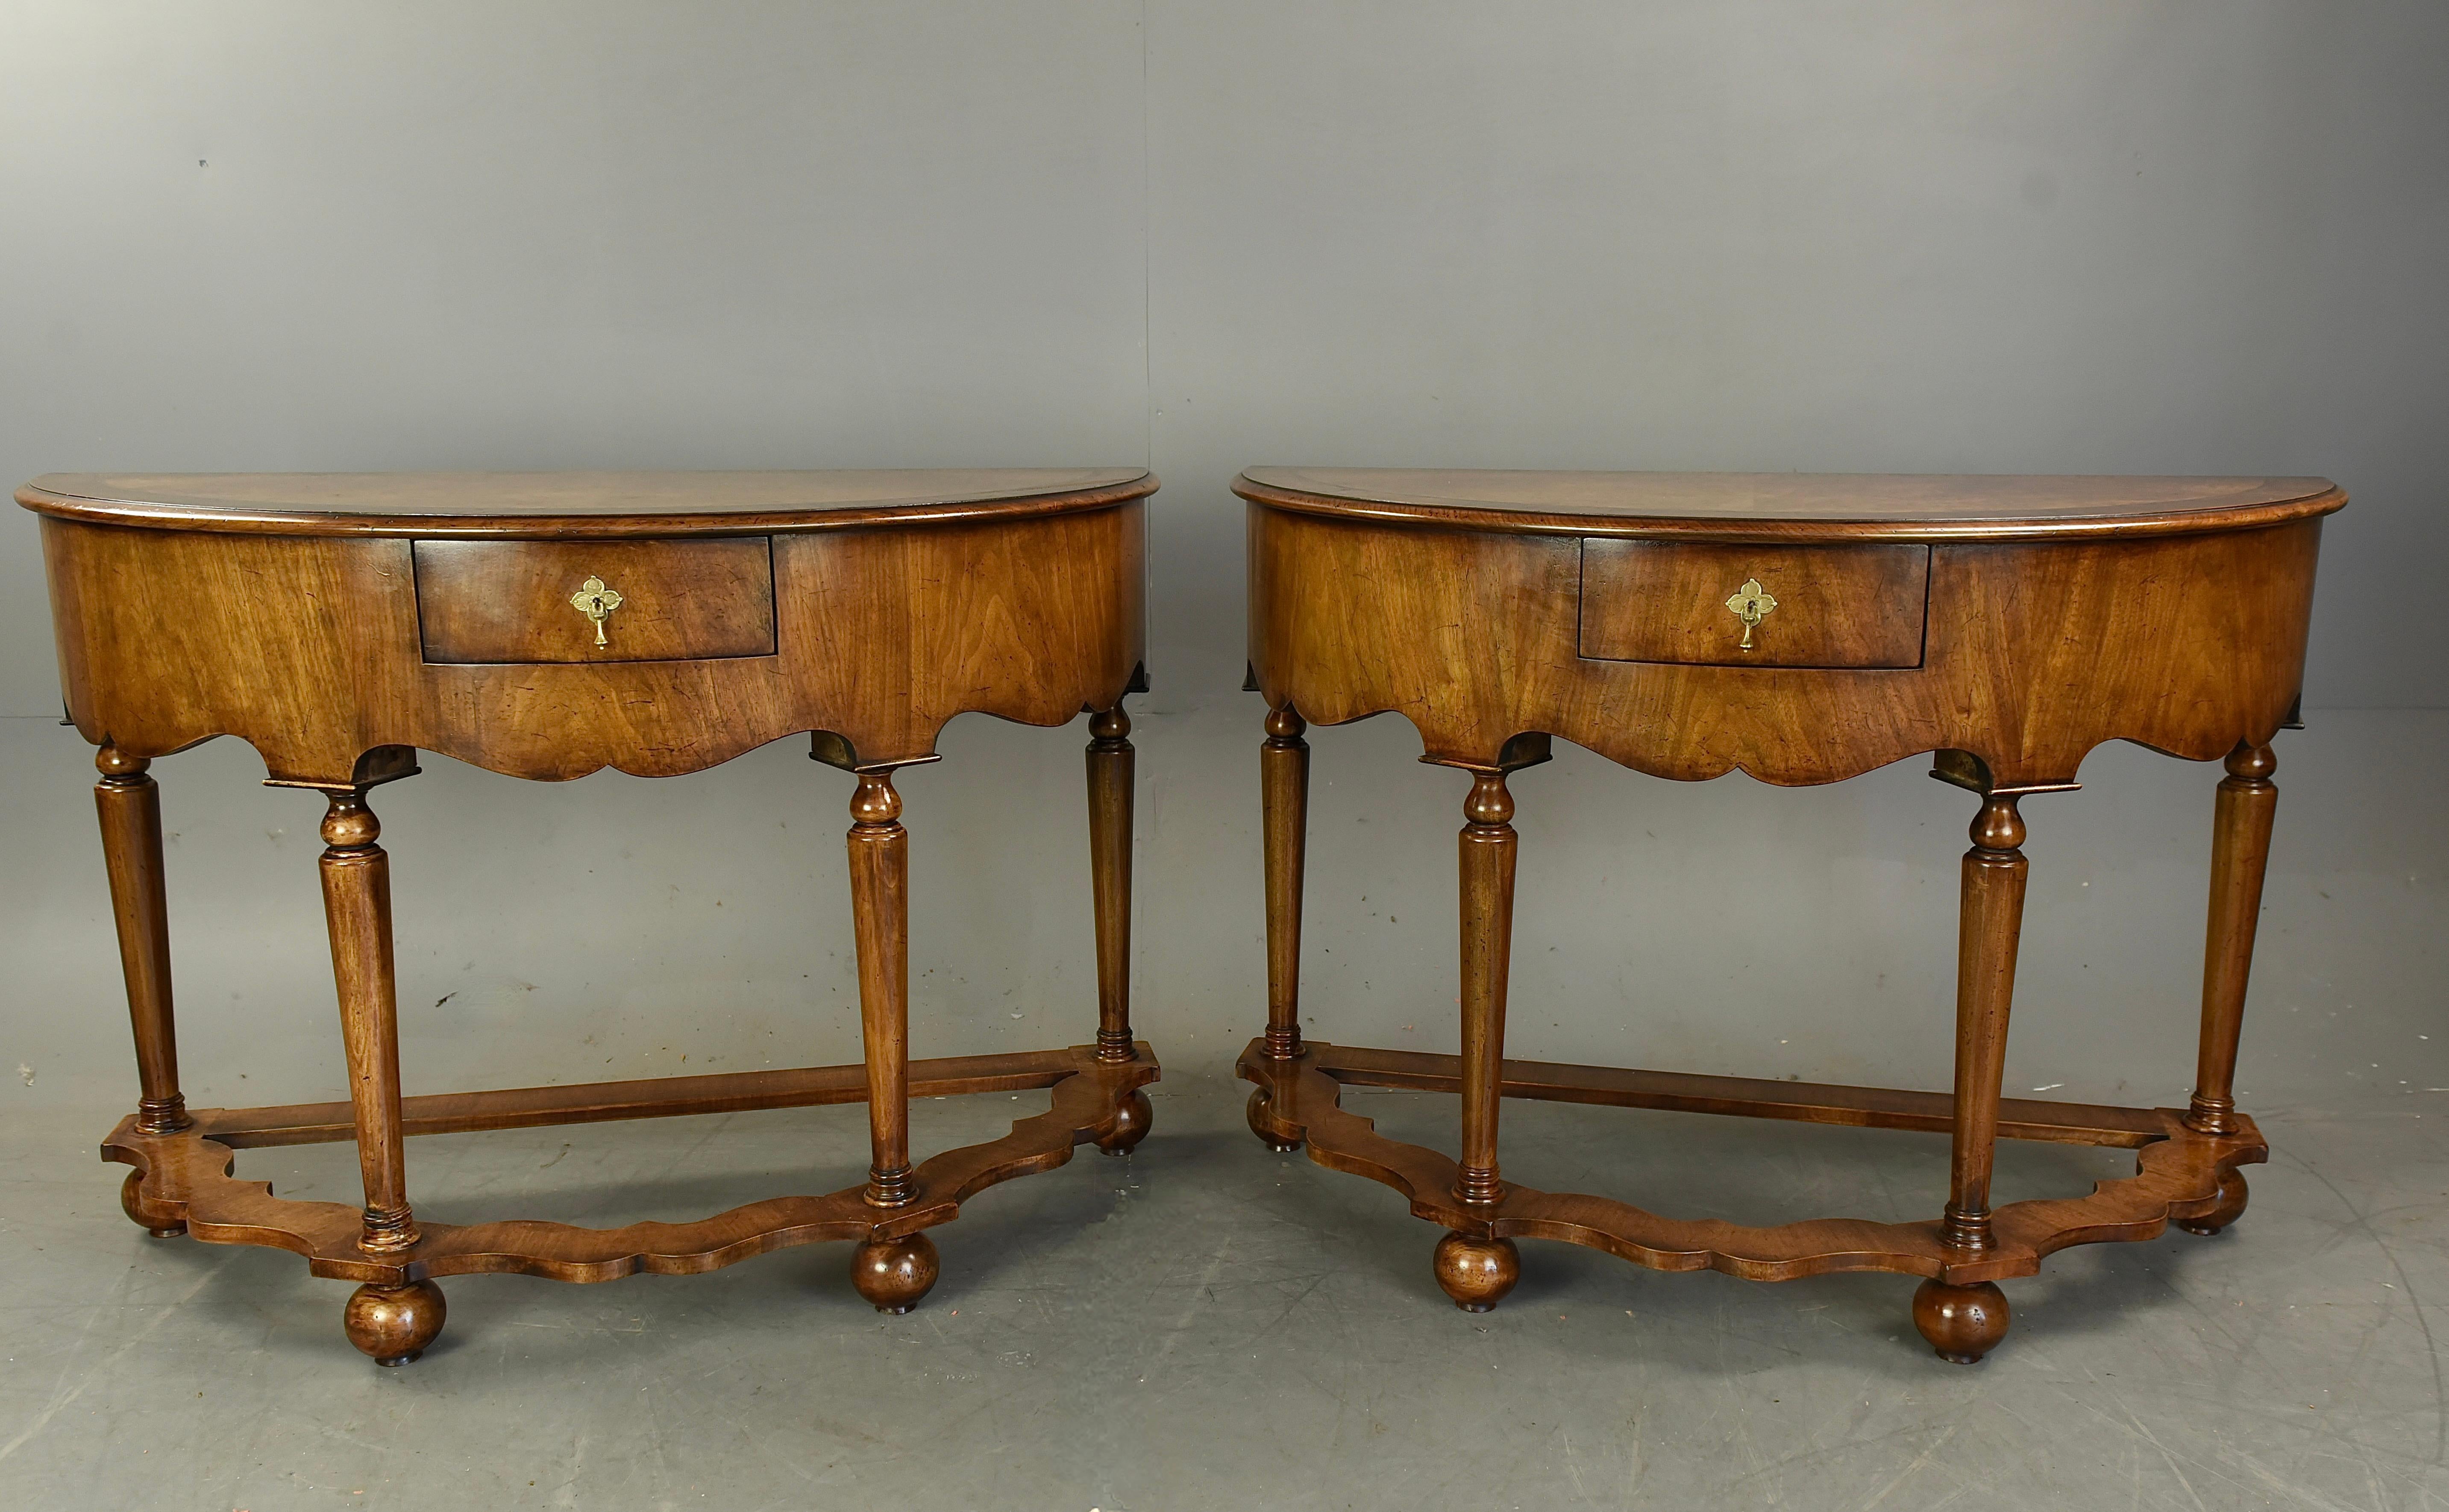 Very good quality pair of walnut Demi lune console tables circa 1900.
They have wonderful Burr walnut tops with walnut and feather edge banding ,each console have a small oak lined hand dovetailed drawer ,with a wonderful grained deep frieze